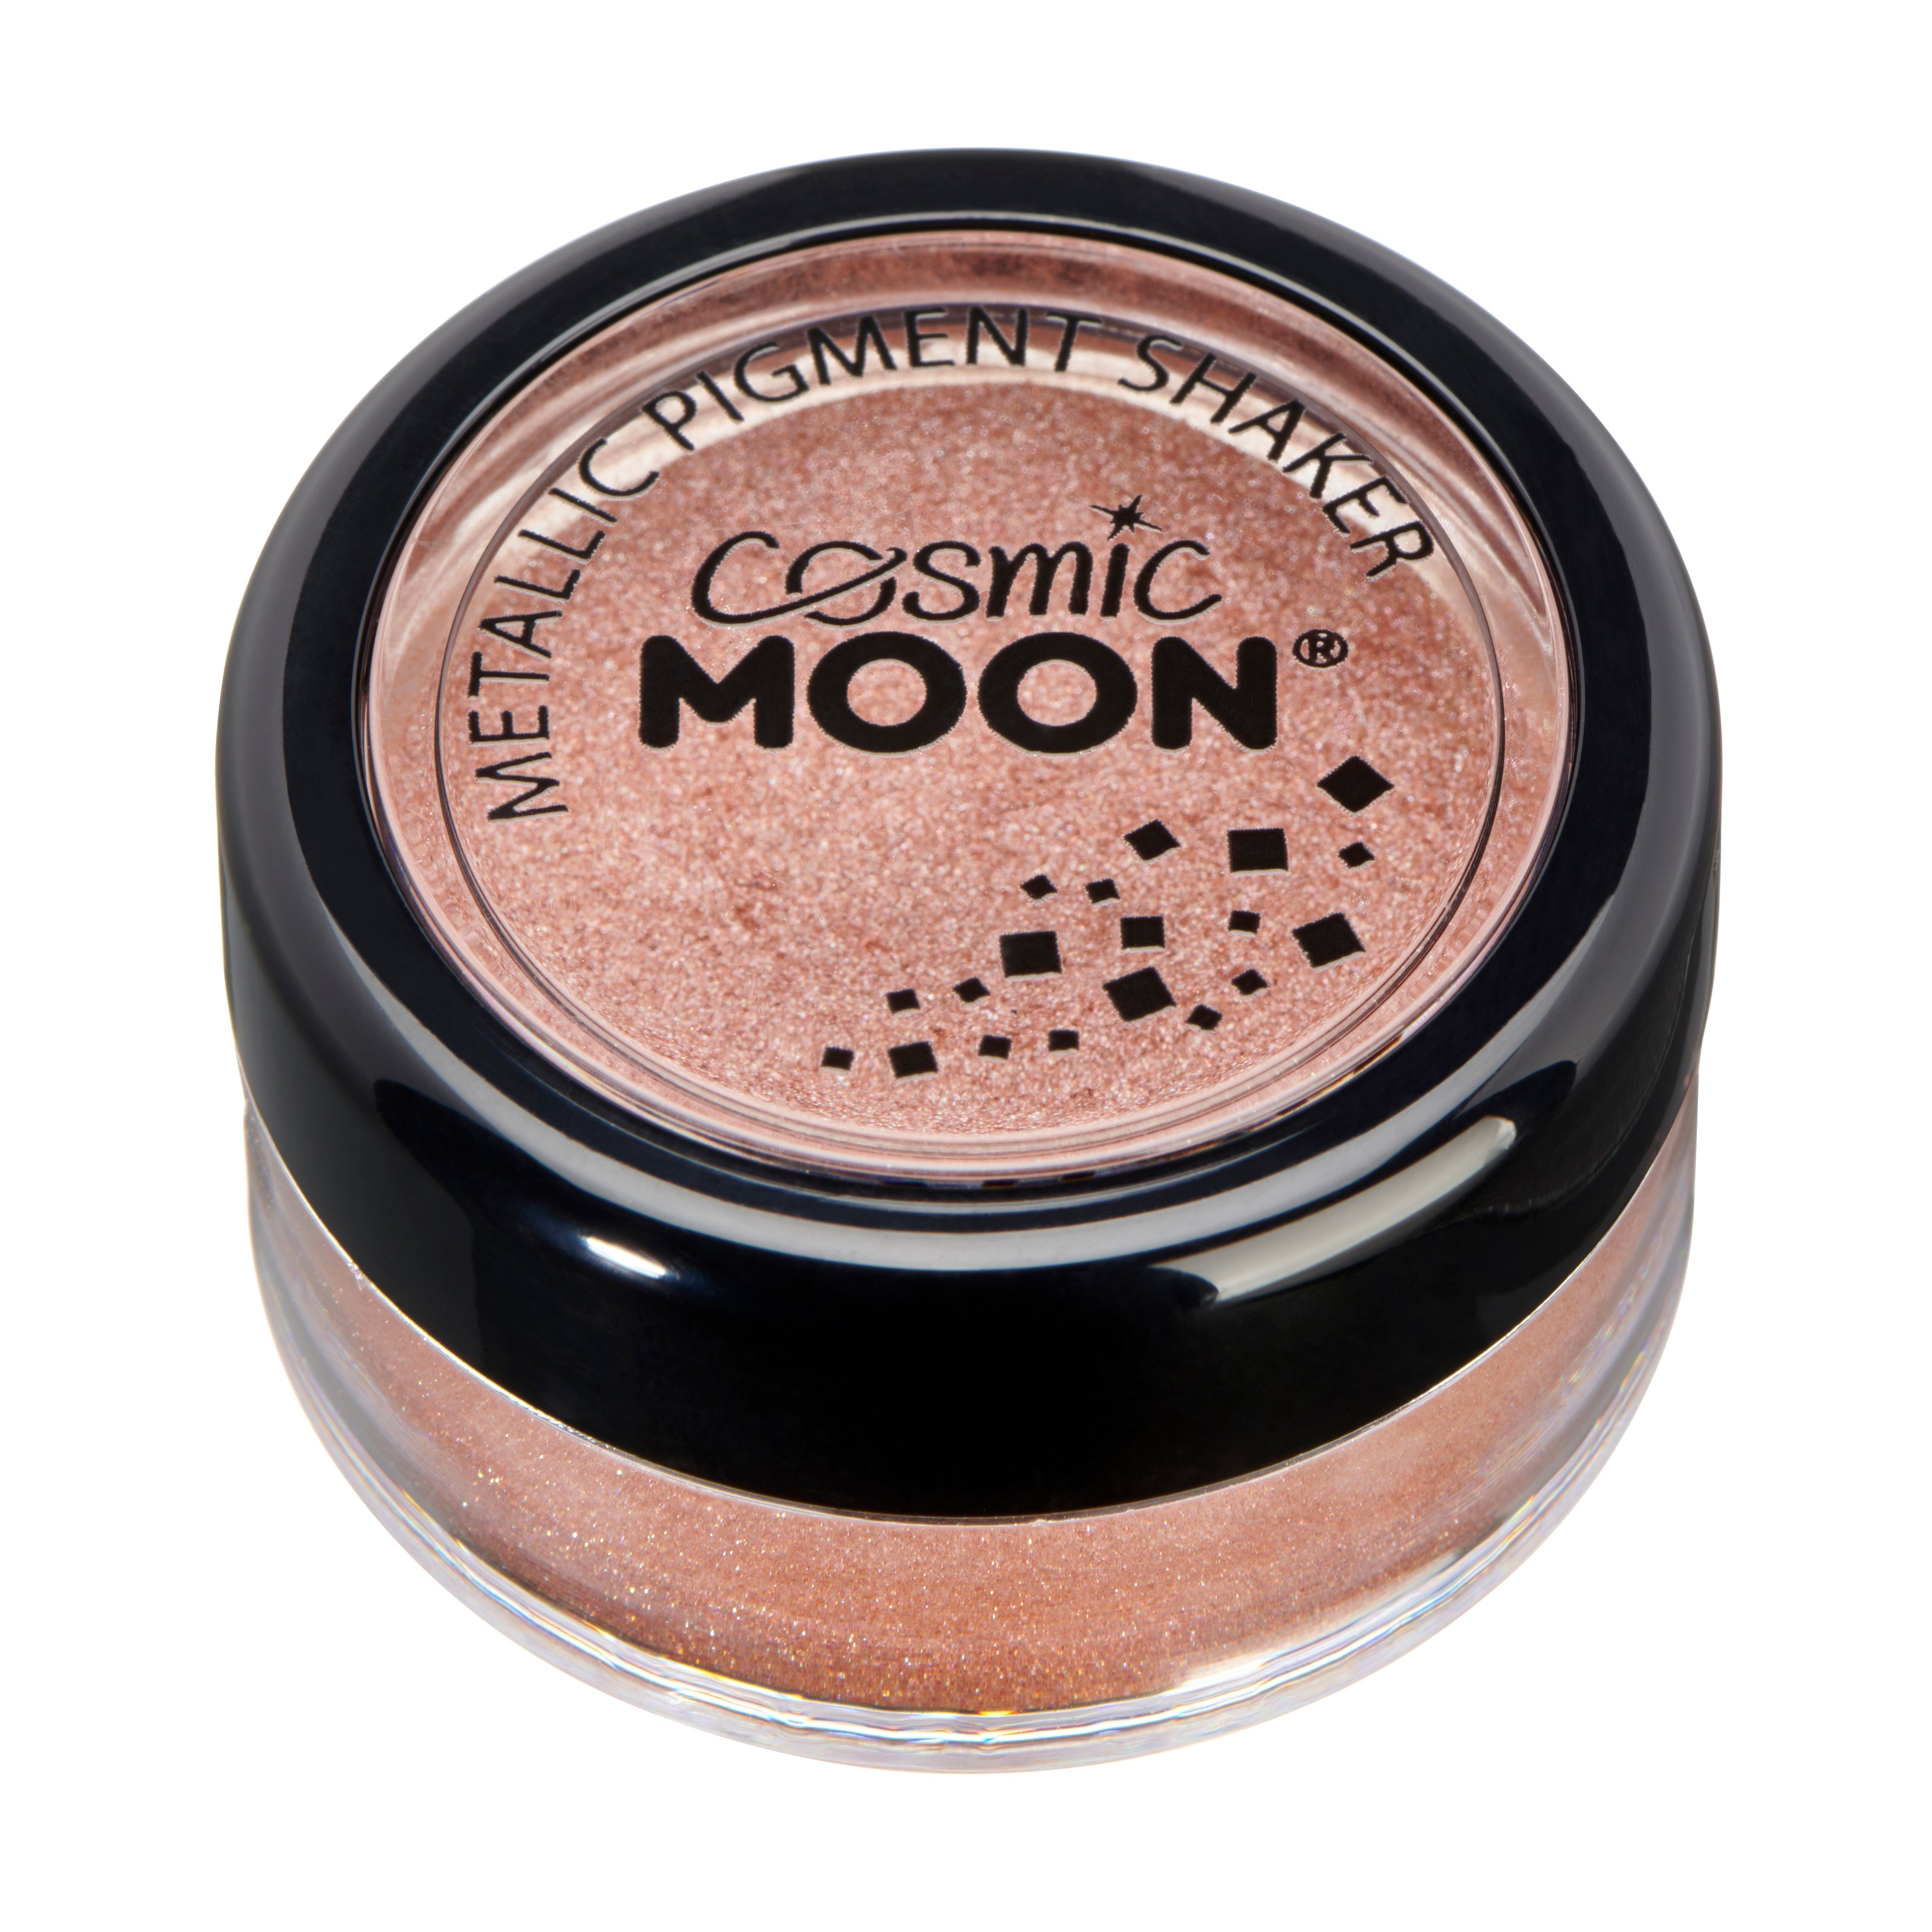 Rose Gold - Metallic Pigment Shaker, 3g. Cosmetically certified, FDA & Health Canada compliant, cruelty free and vegan.